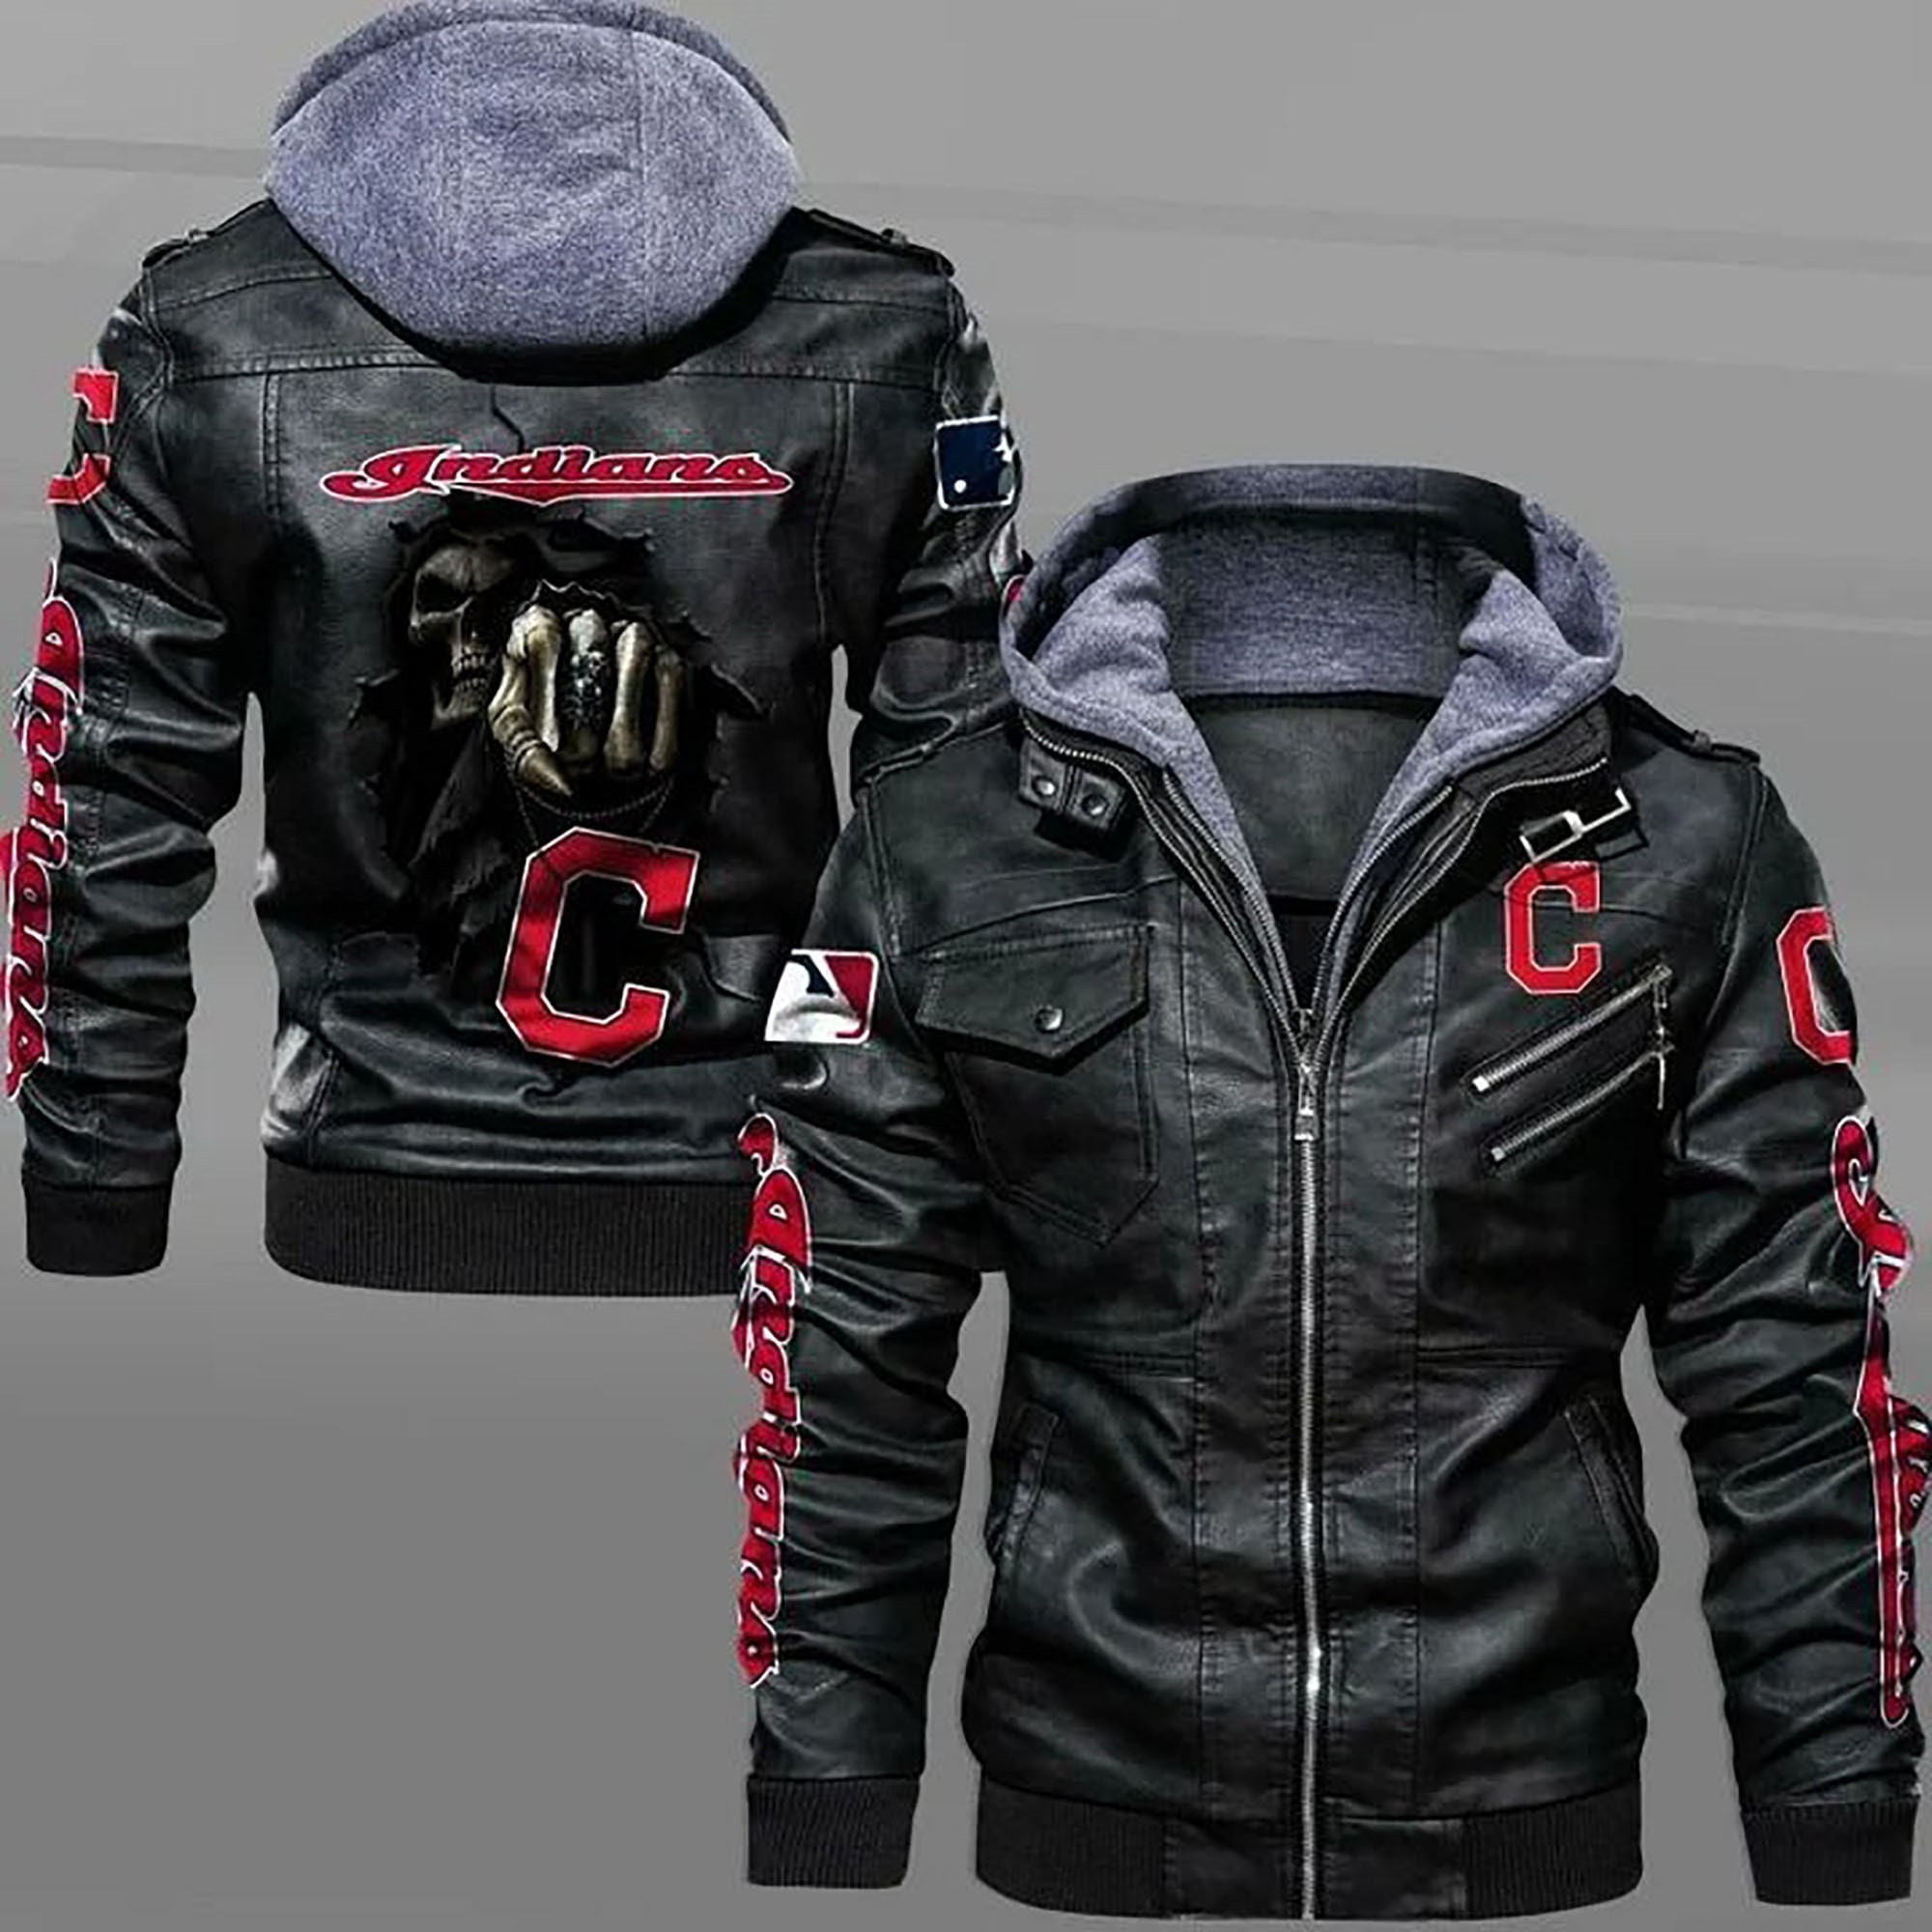 These Amazing Leather Jacket will add to the appeal of your outfit 47